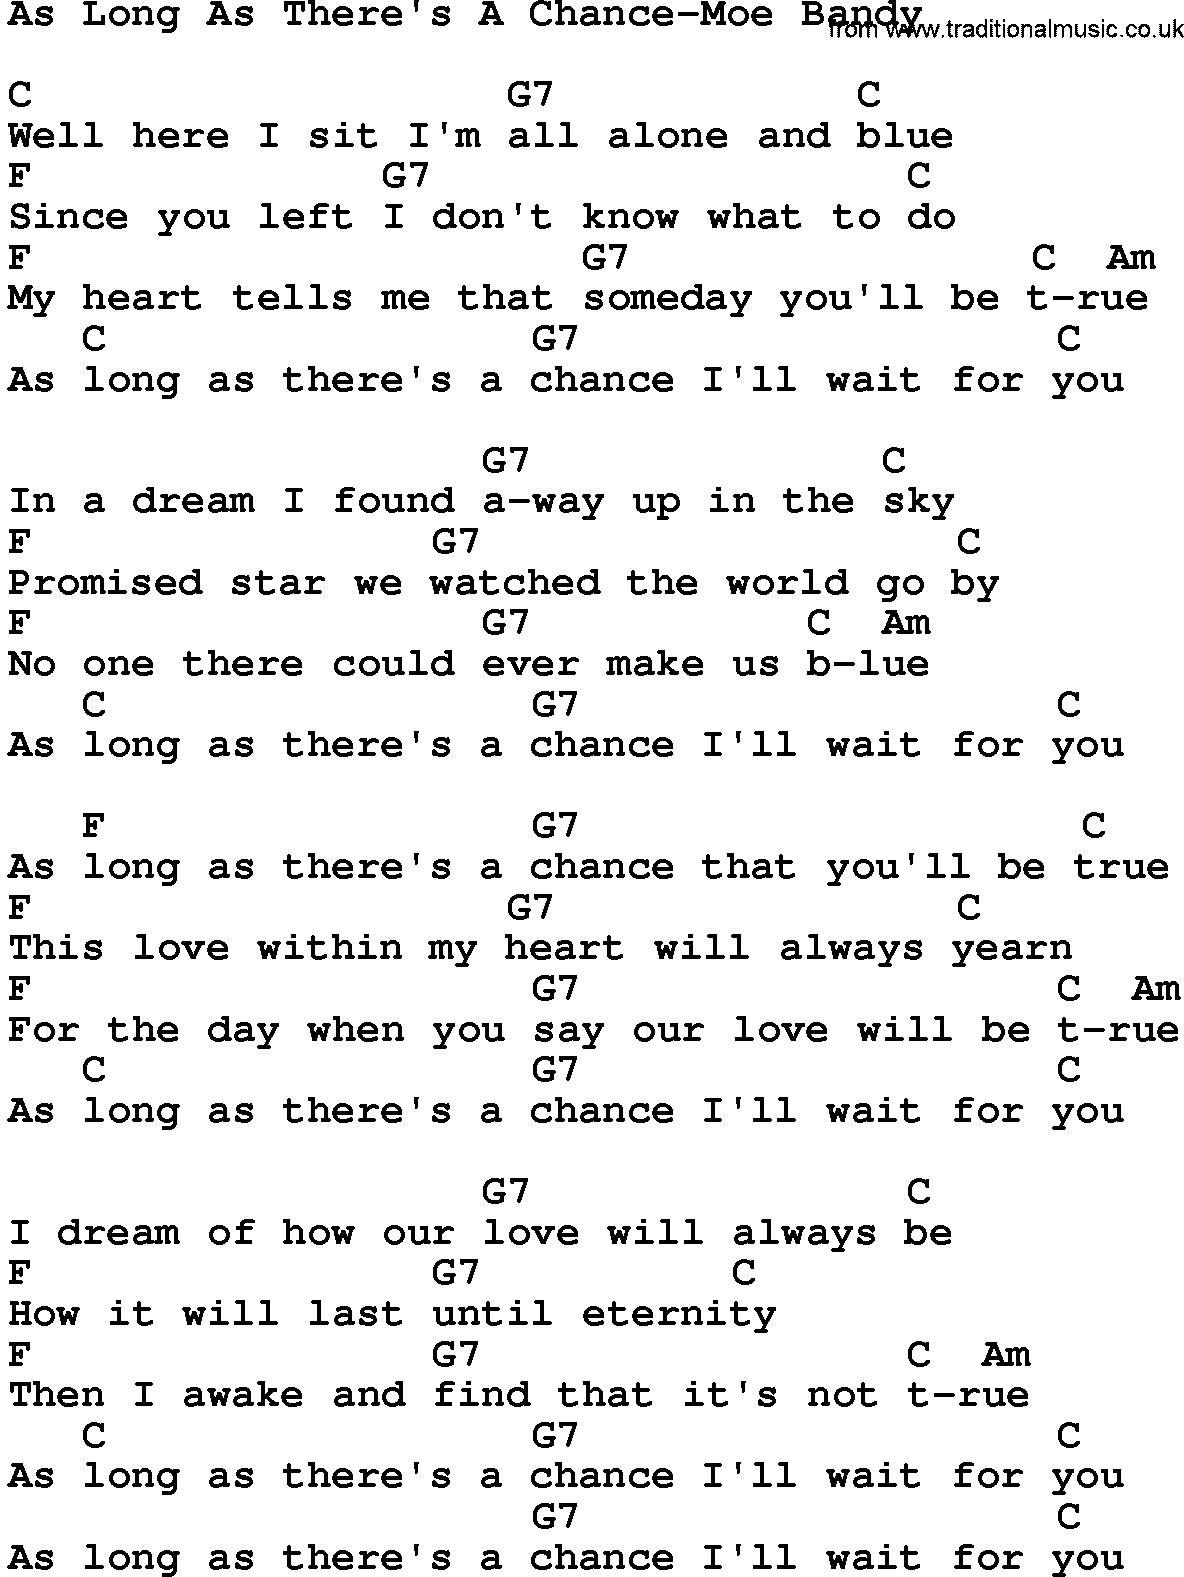 Country music song: As Long As There's A Chance-Moe Bandy lyrics and chords